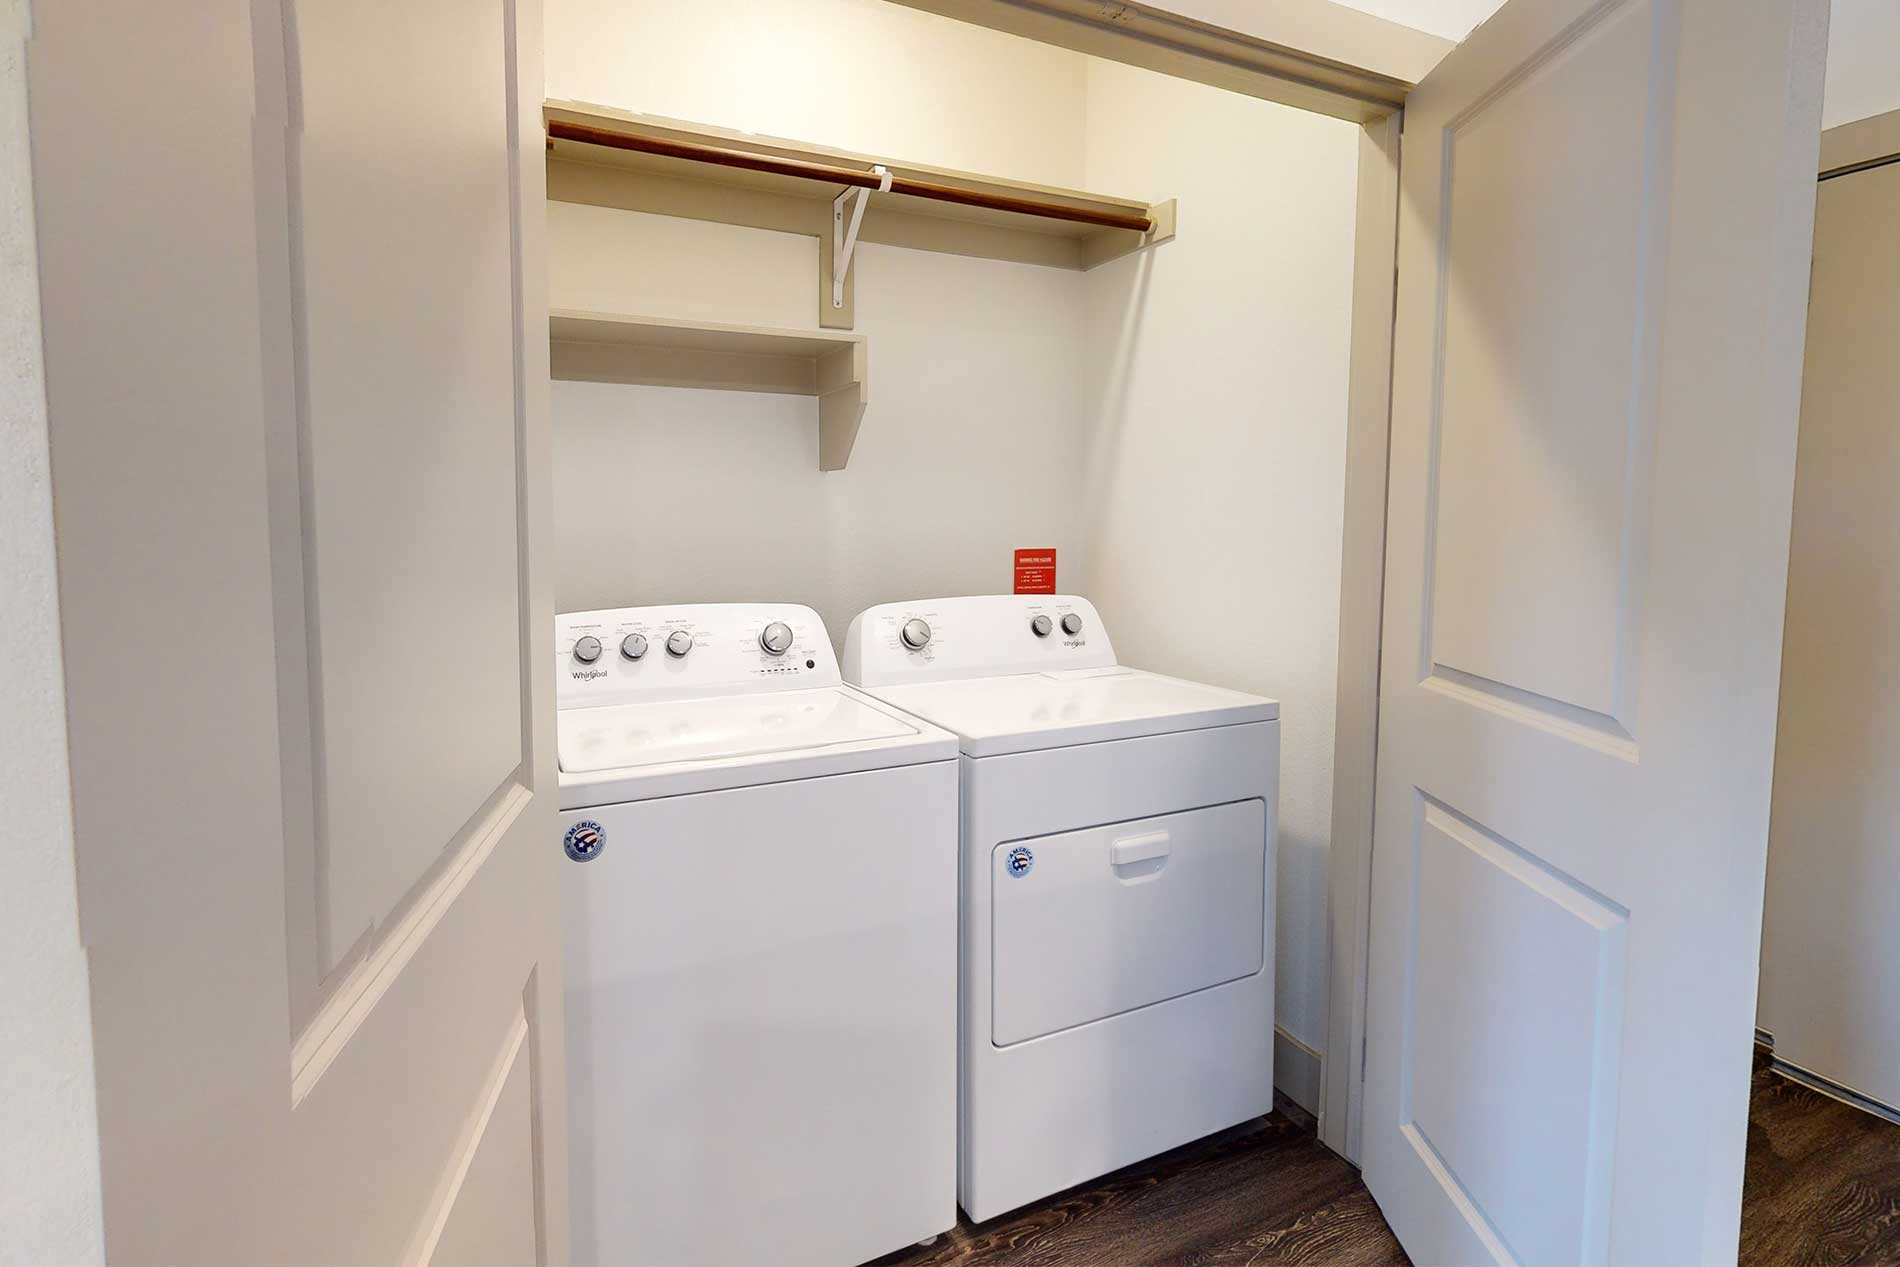 The Canal apartment laundry room